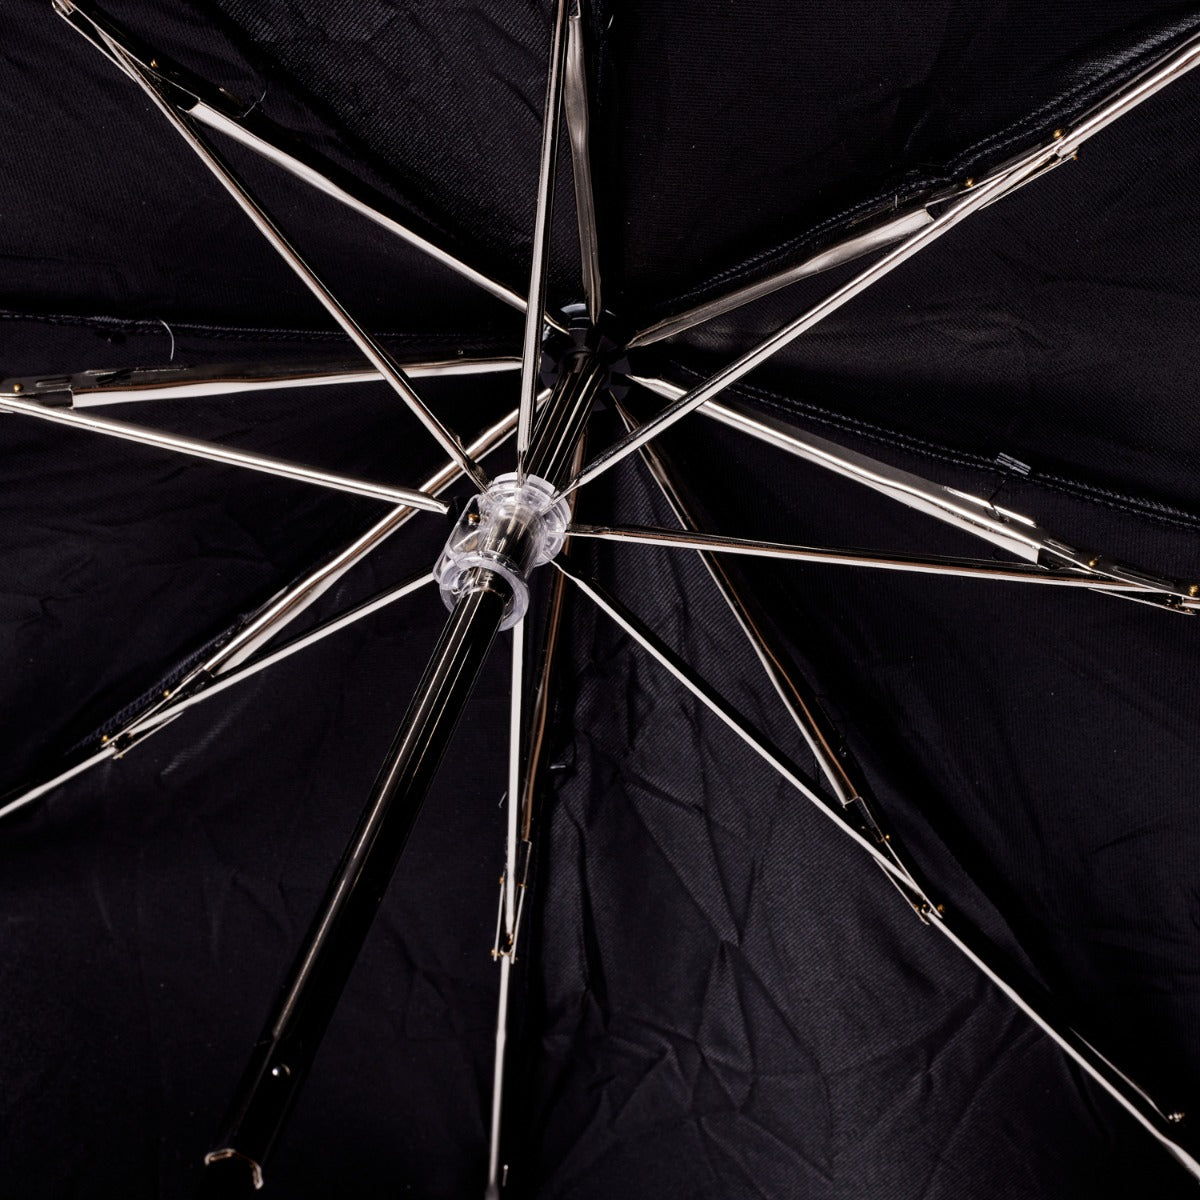 A Brown Alligator Travel Umbrella with Black Canopy by KirbyAllison.com, featuring a handcrafted design and a metal handle.